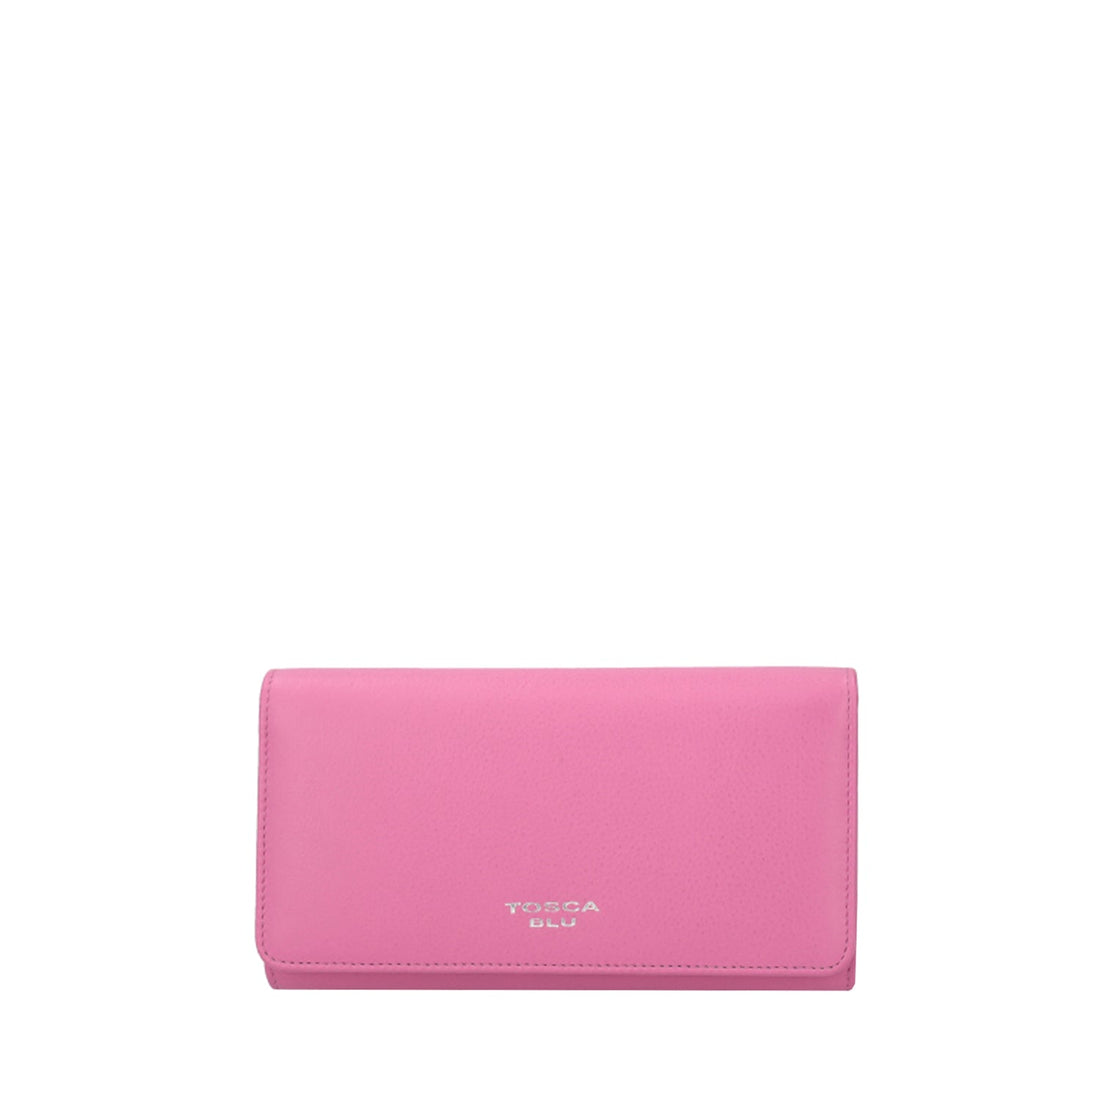 PINK LARGE BASIC WALLETS WALLET WITH FLAP